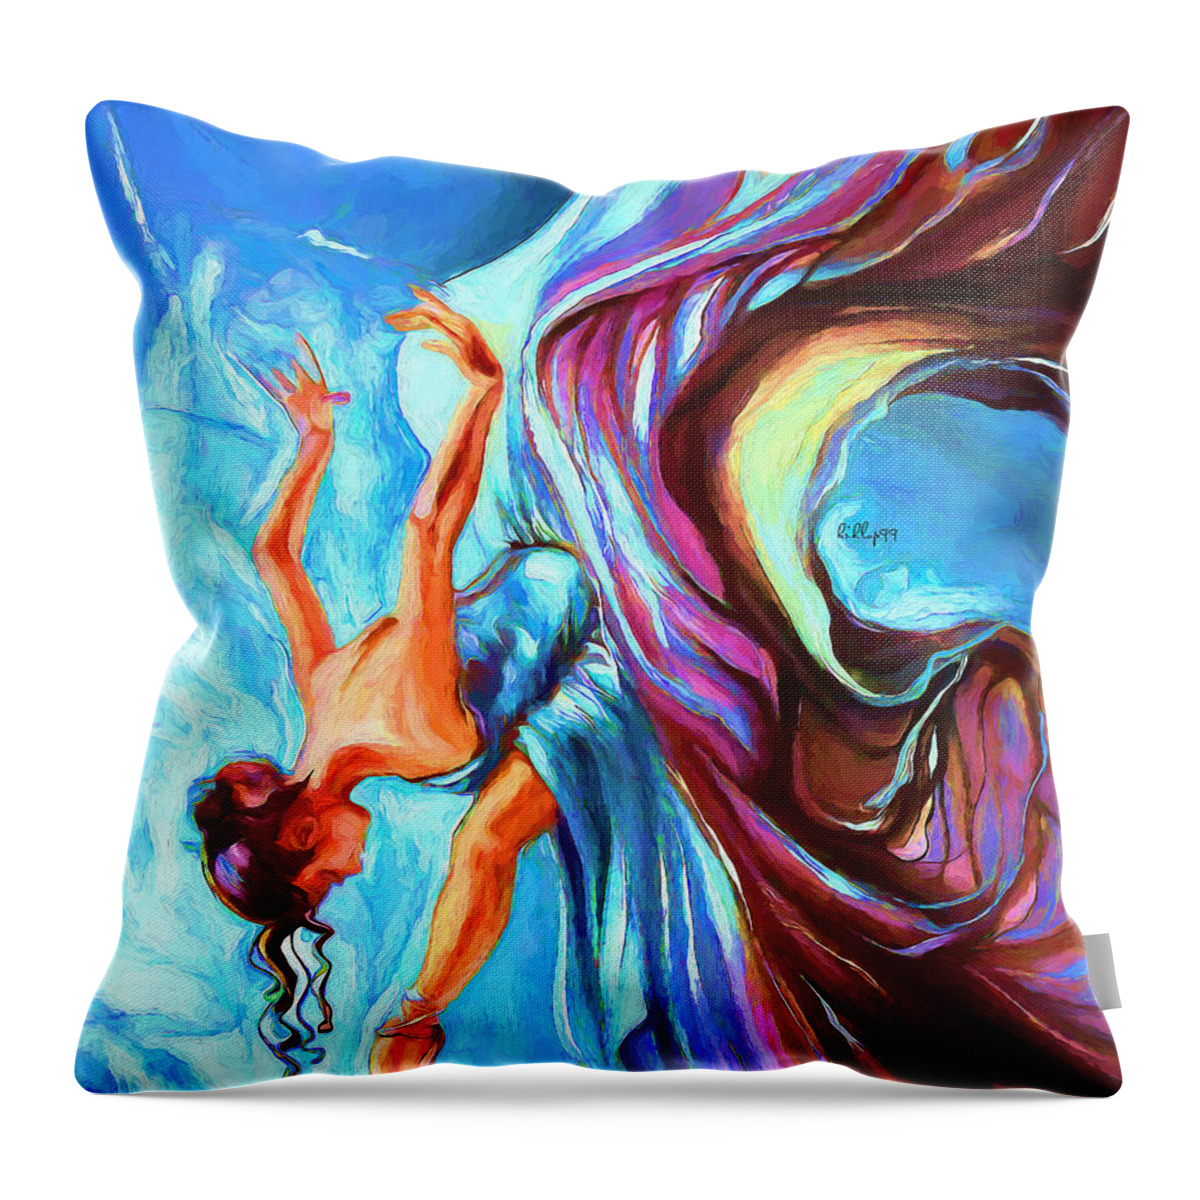 Paint Throw Pillow featuring the painting Ballerina 3 by Nenad Vasic